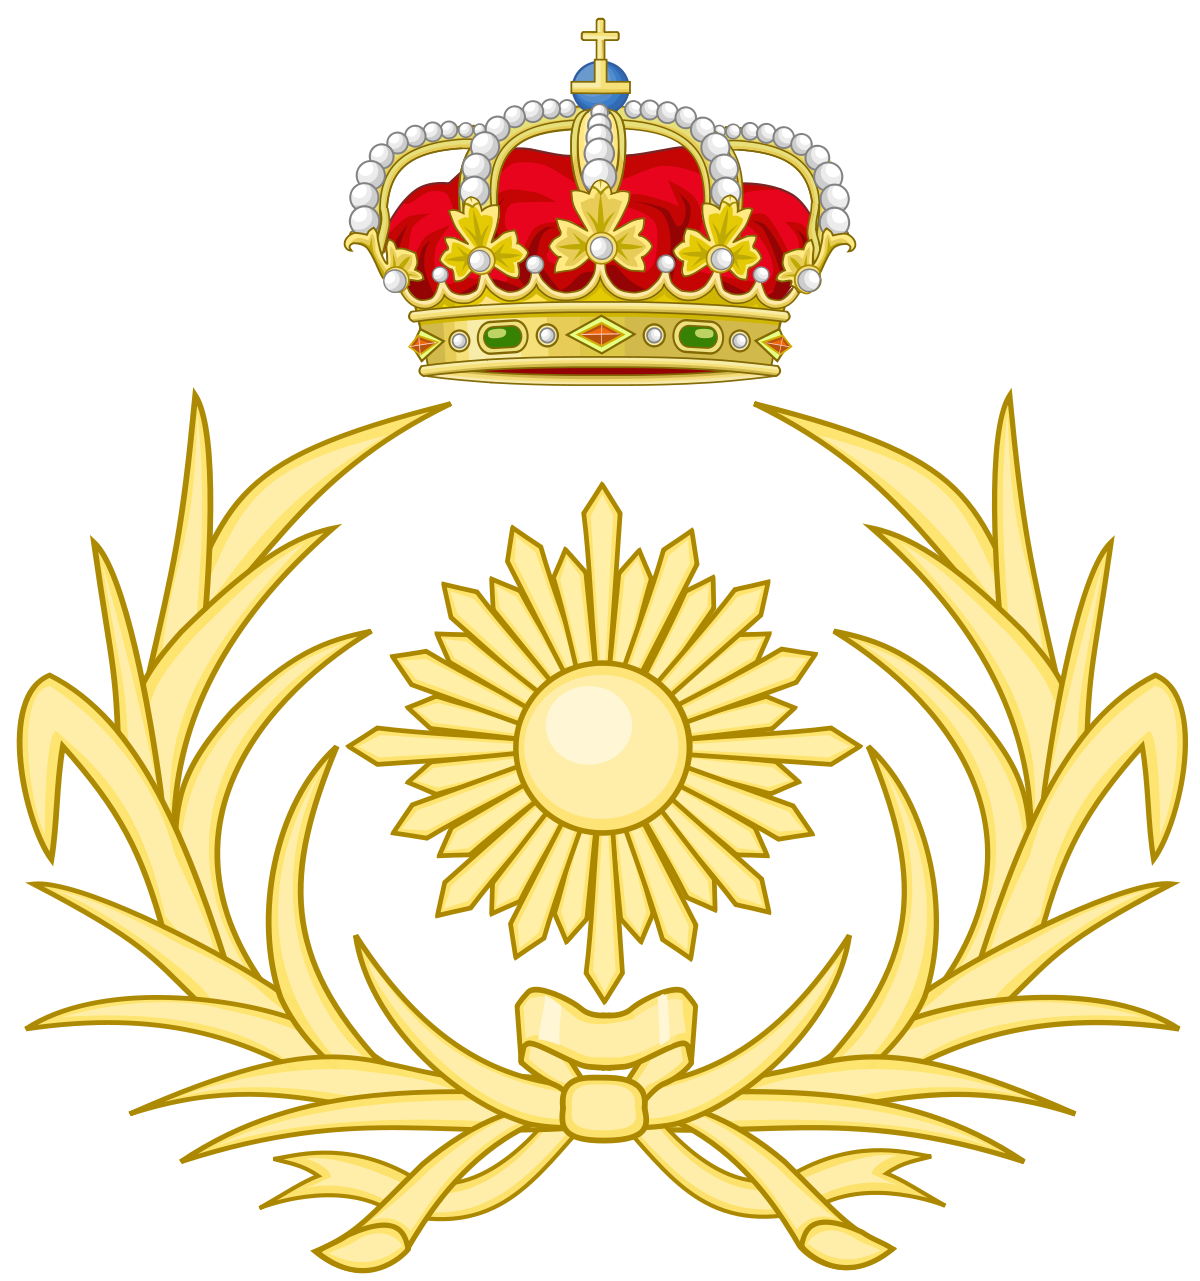 Download File:Emblem of the Logistics Forces of the Spanish Army ...